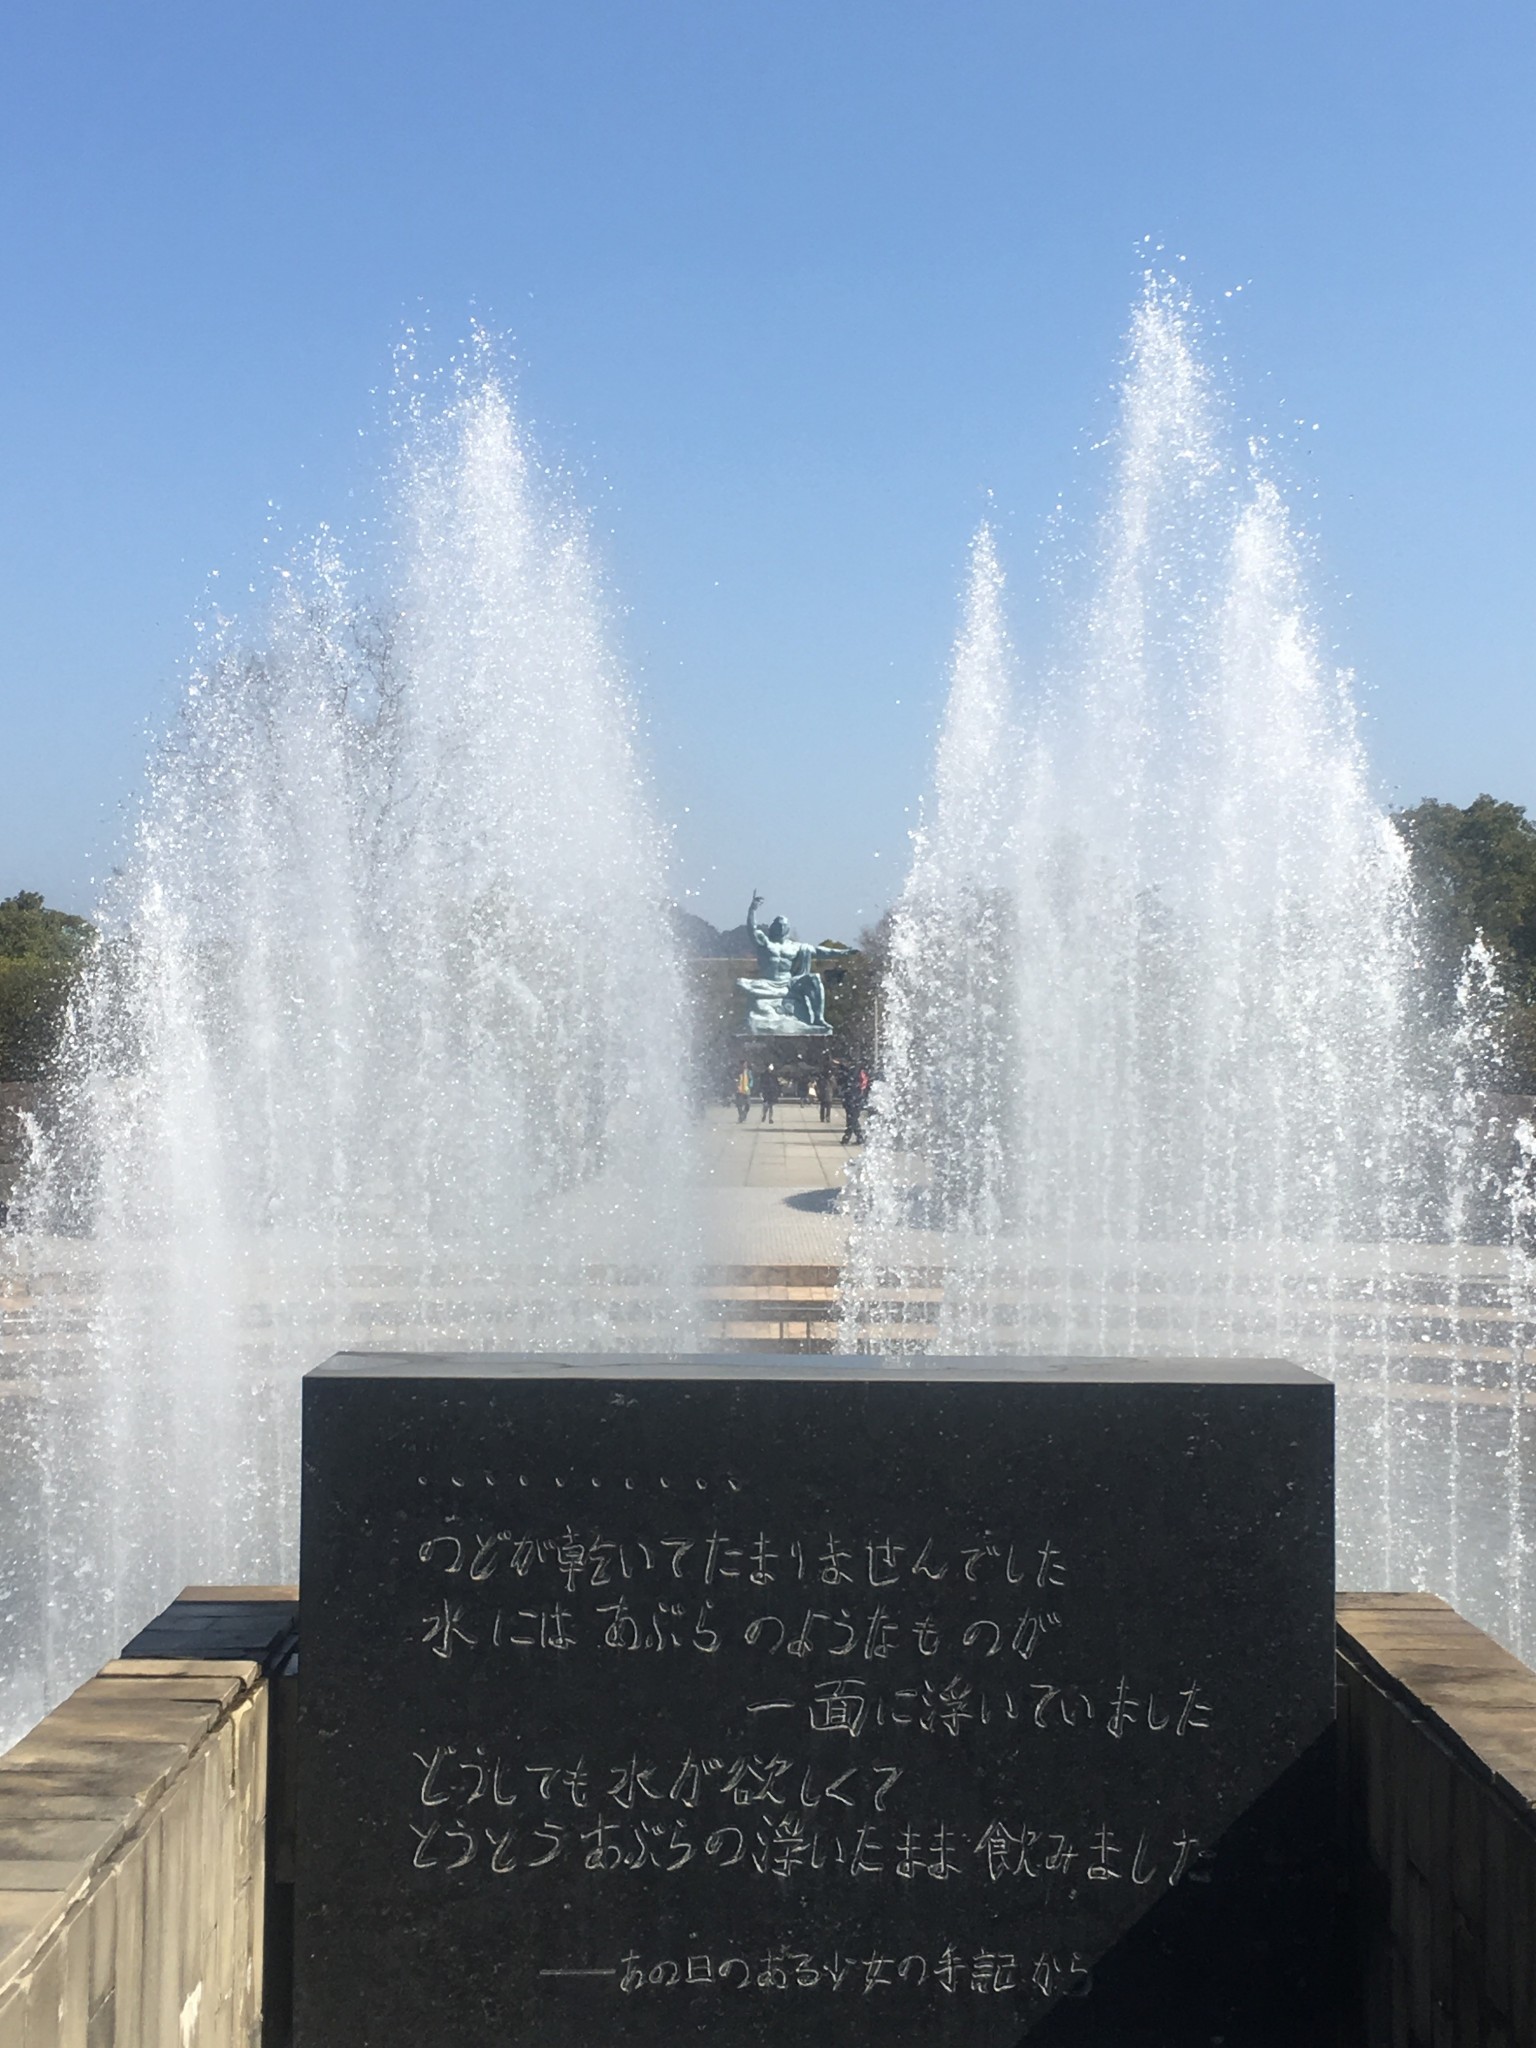 Peace Park in Nagasaki, a place of remembrance